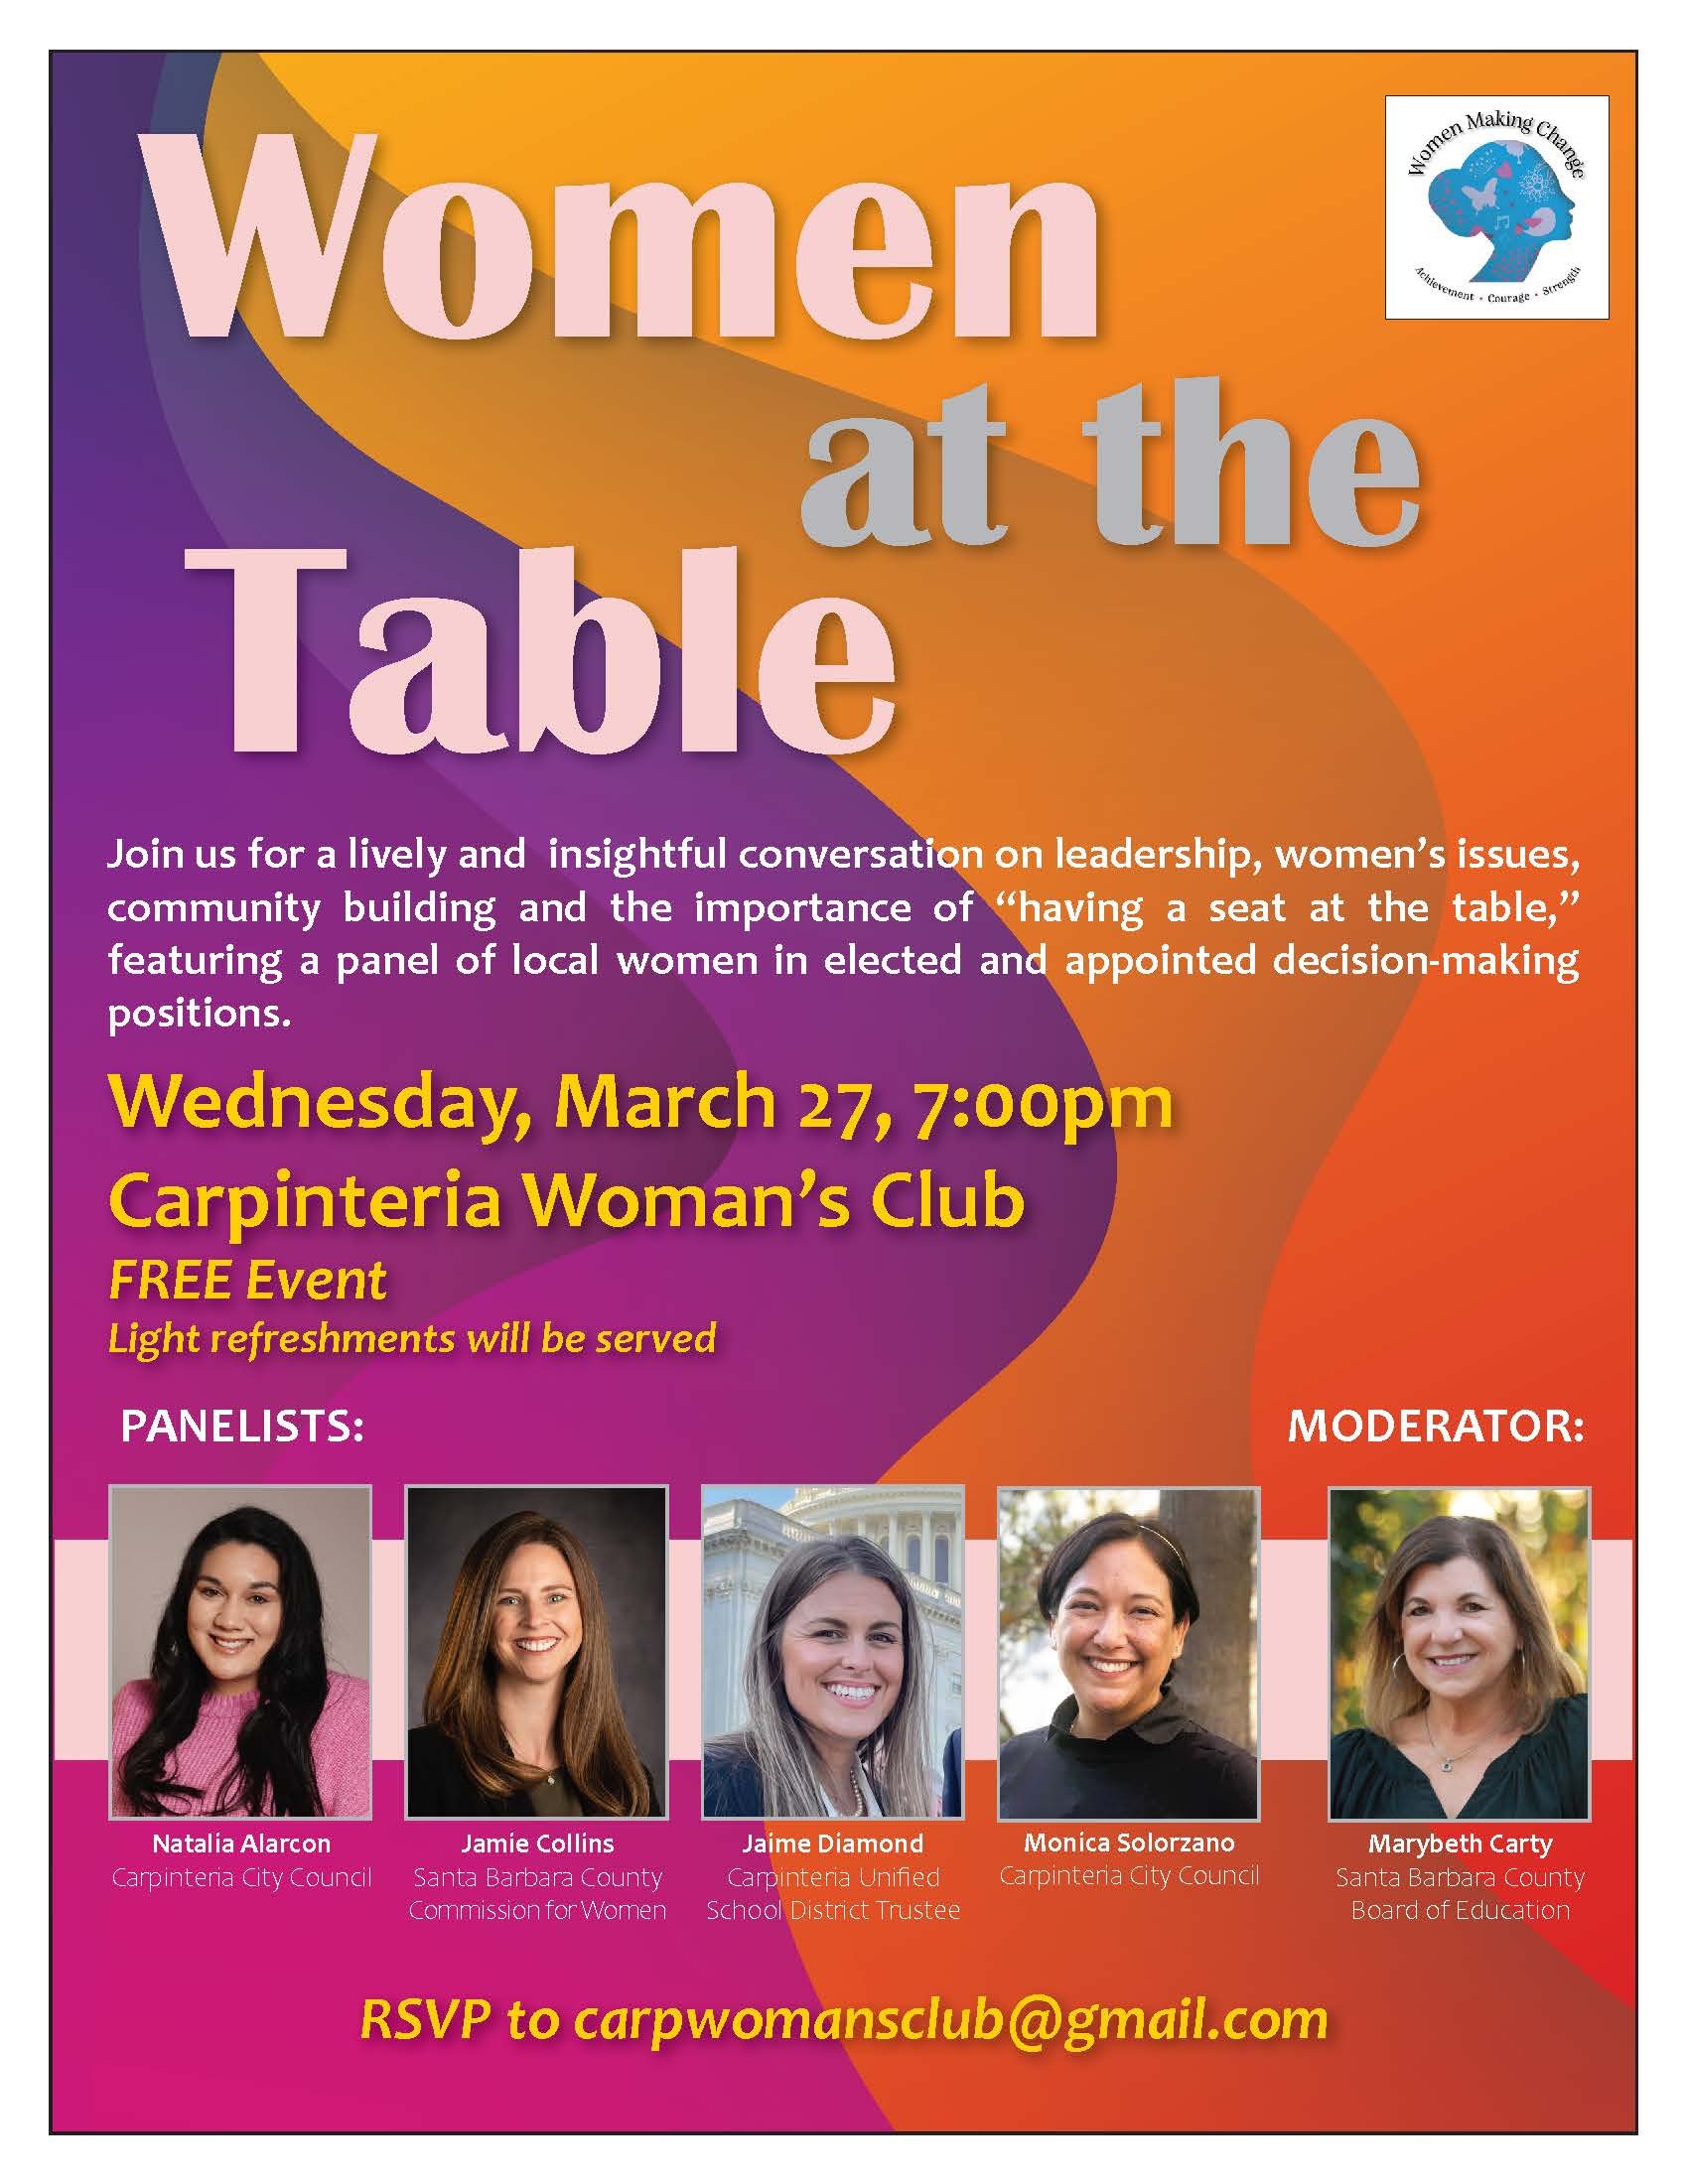 Women at the Table Flyer.jpg